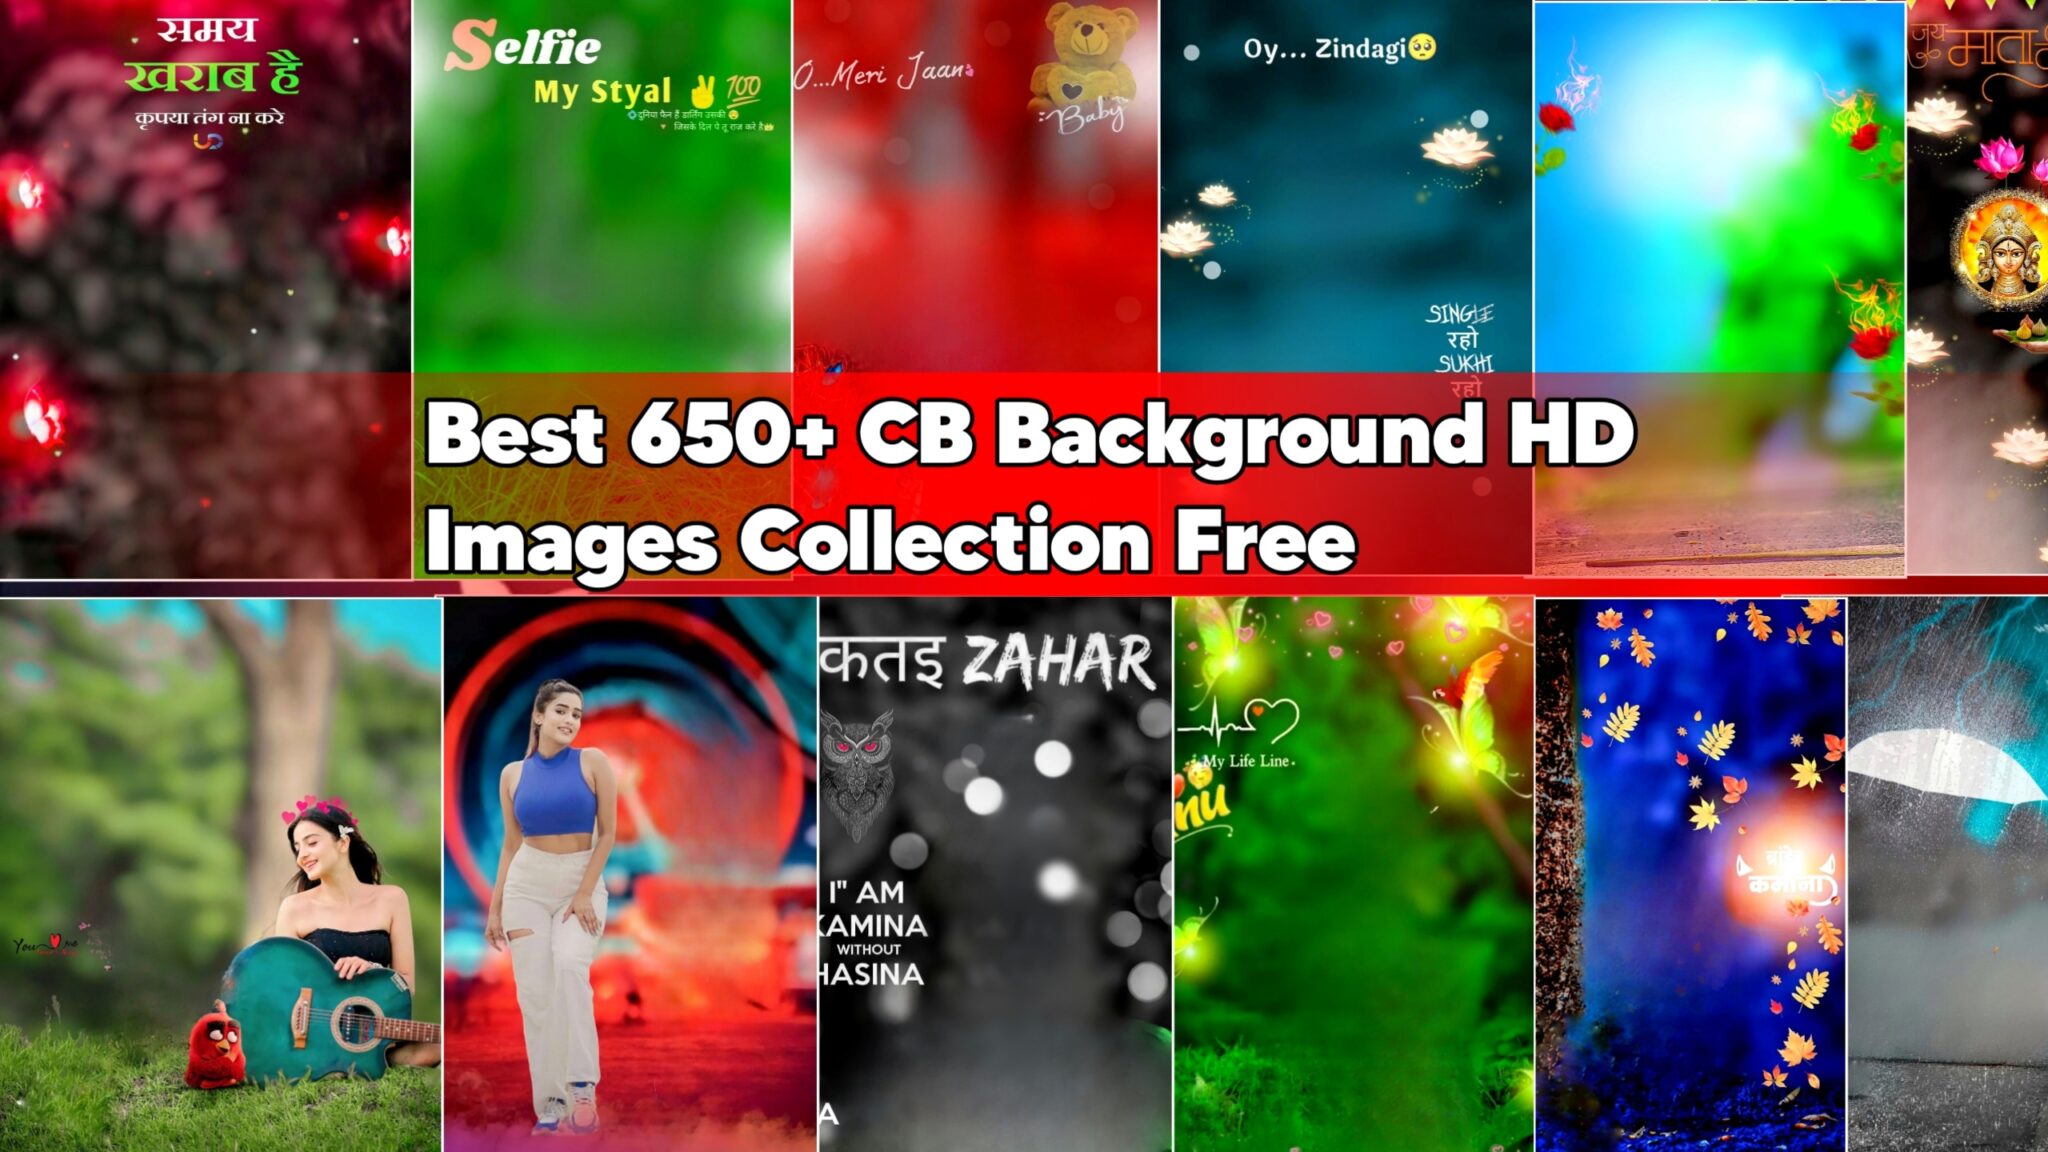 Best 650+ CB Background HD Images 4k Collection Free